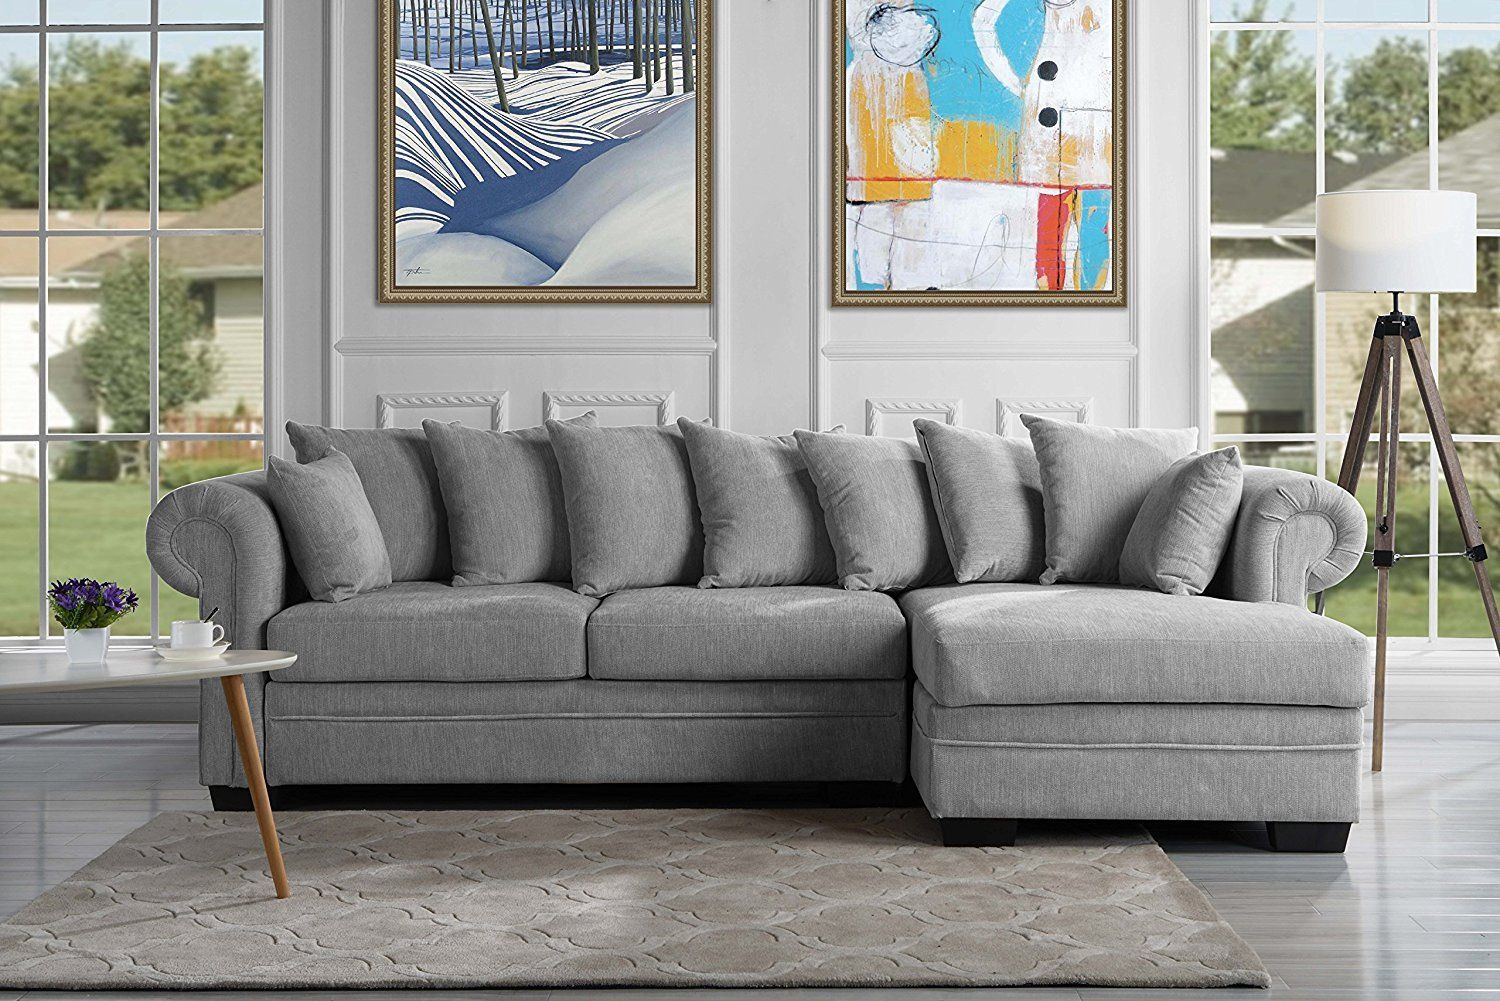 Modern Large Sectional Sofa, L Shape Couch W/ Extra Wide Chaise, Light Regarding Modern Light Grey Loveseat Sofas (View 5 of 20)